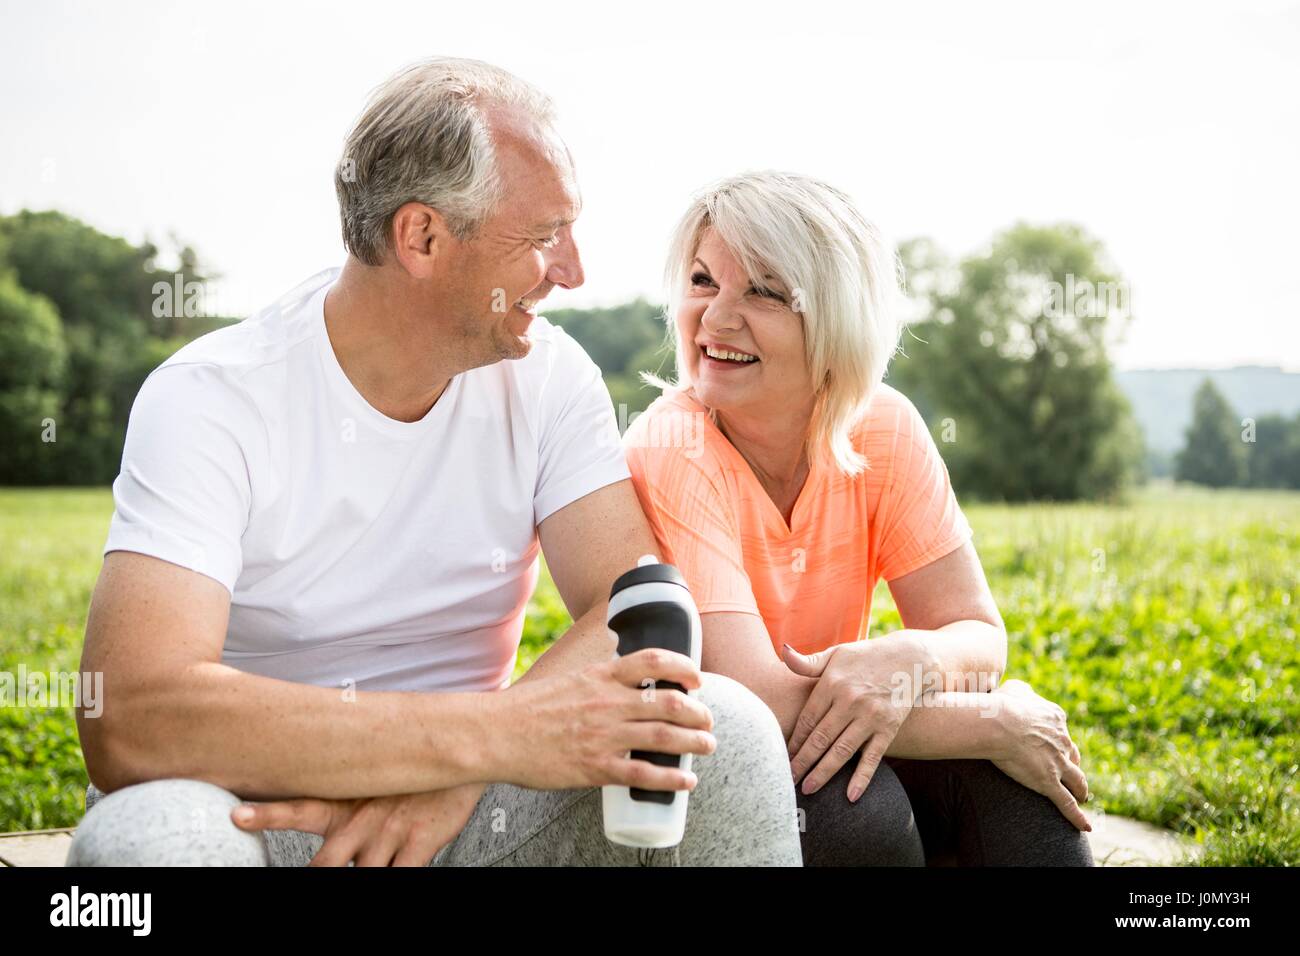 Mature couple sitting outdoors resting, man holding water bottle. Stock Photo